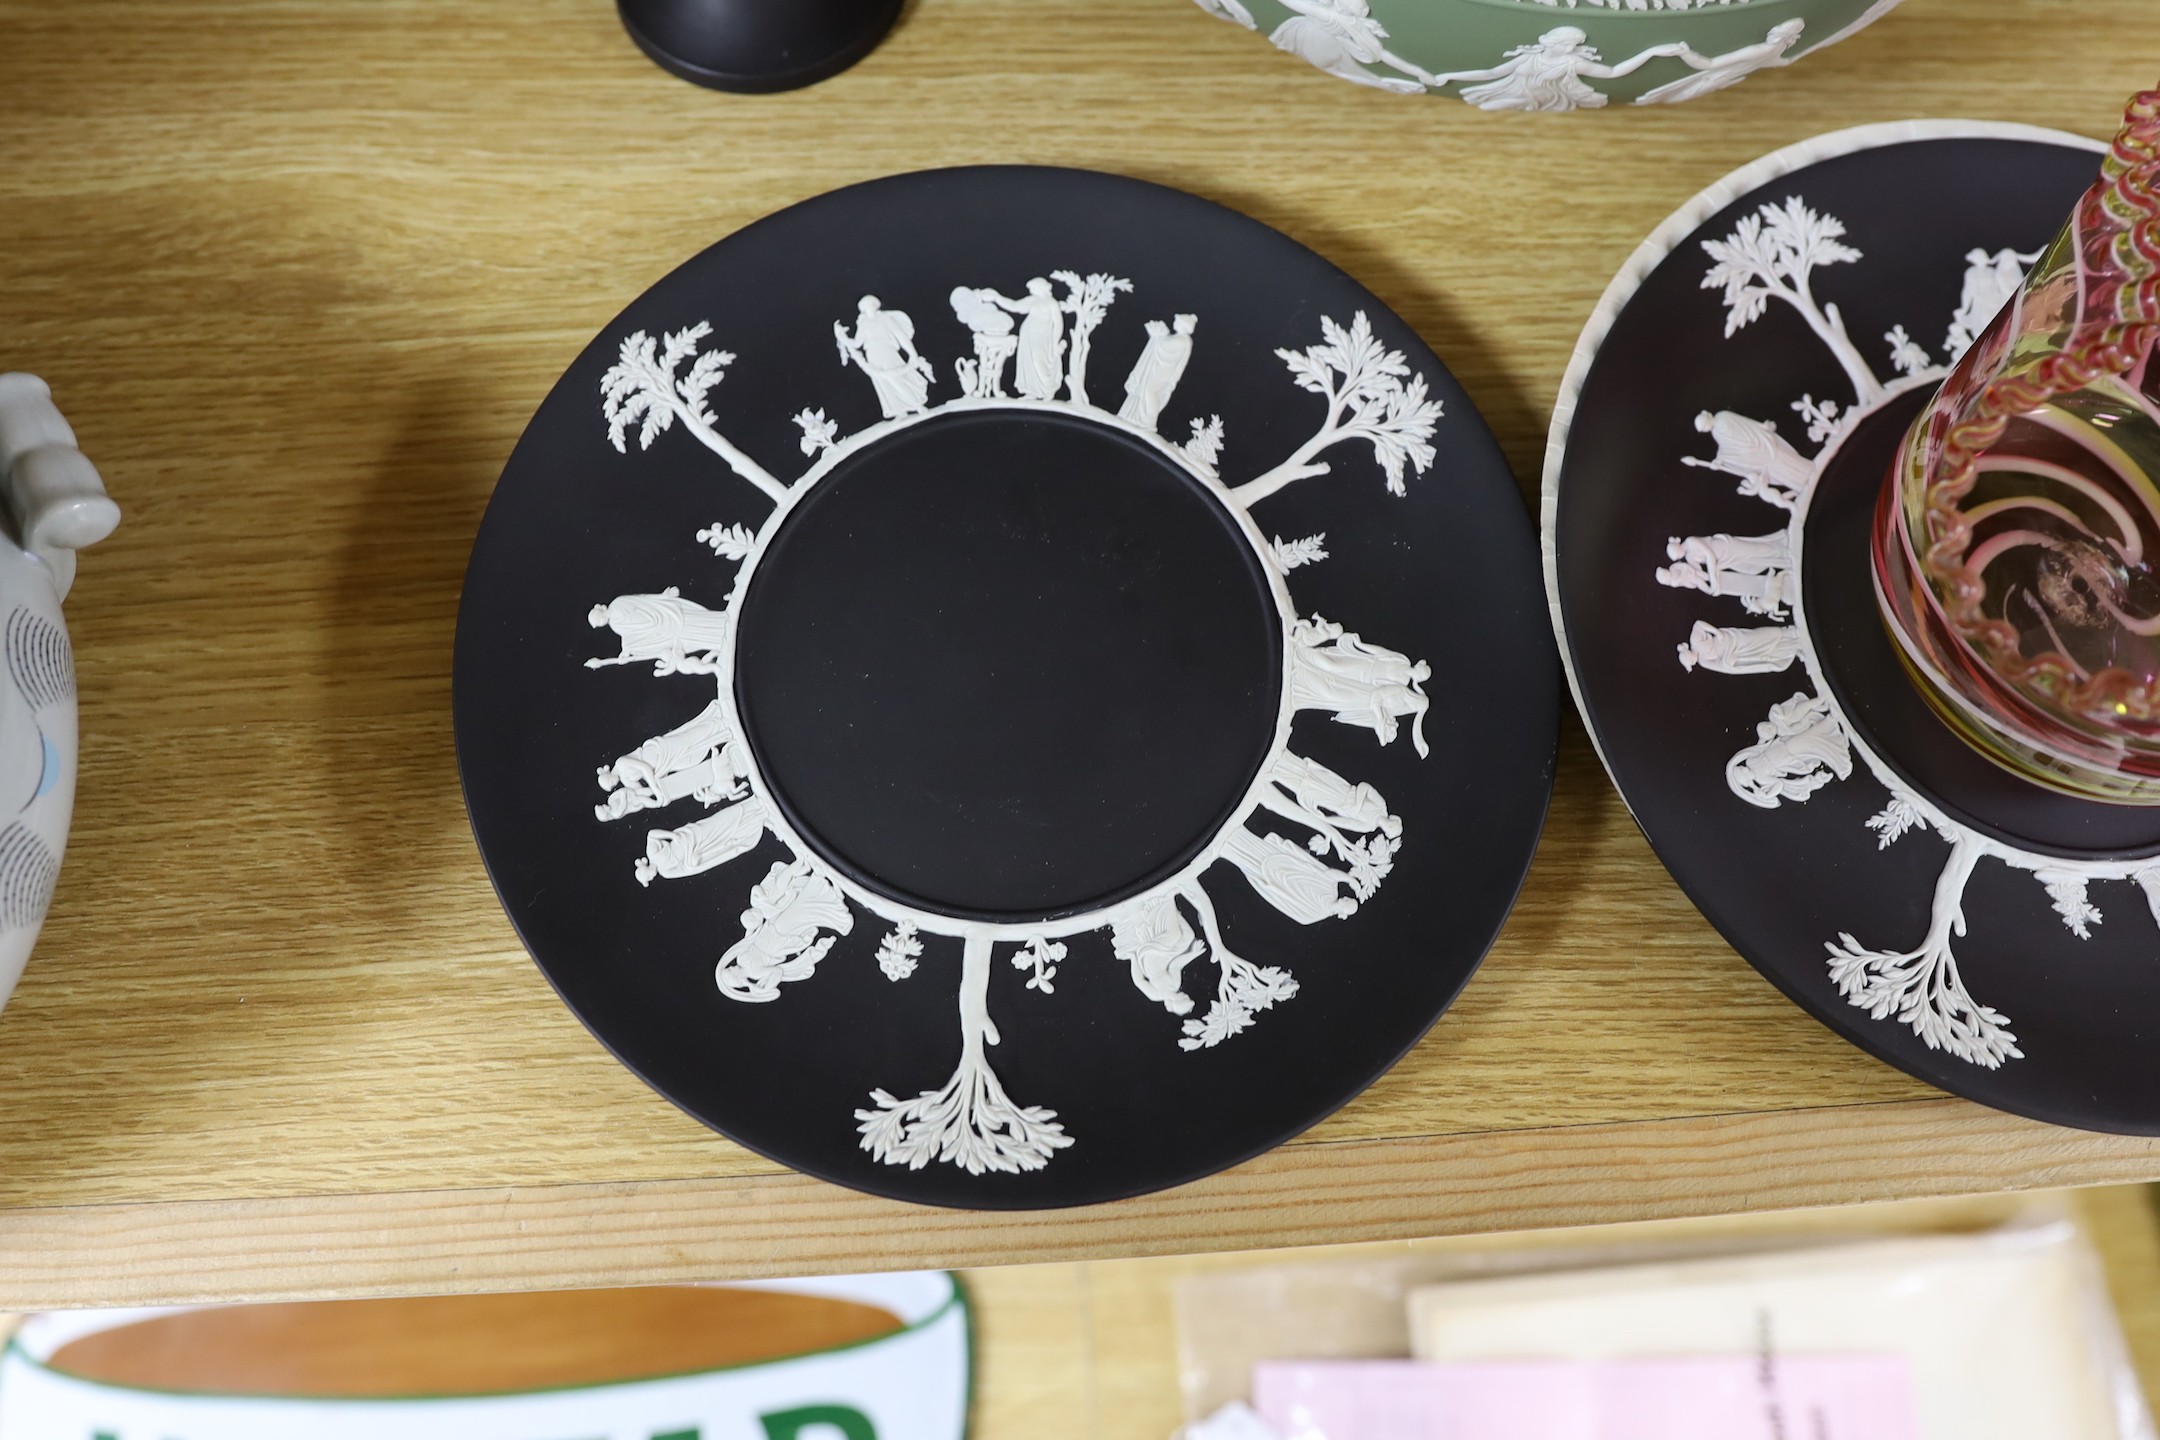 A Wedgwood black basalt pair vases, bowls, 3 plates and green bowl and glass bowl, vase 18 cms - Image 3 of 5